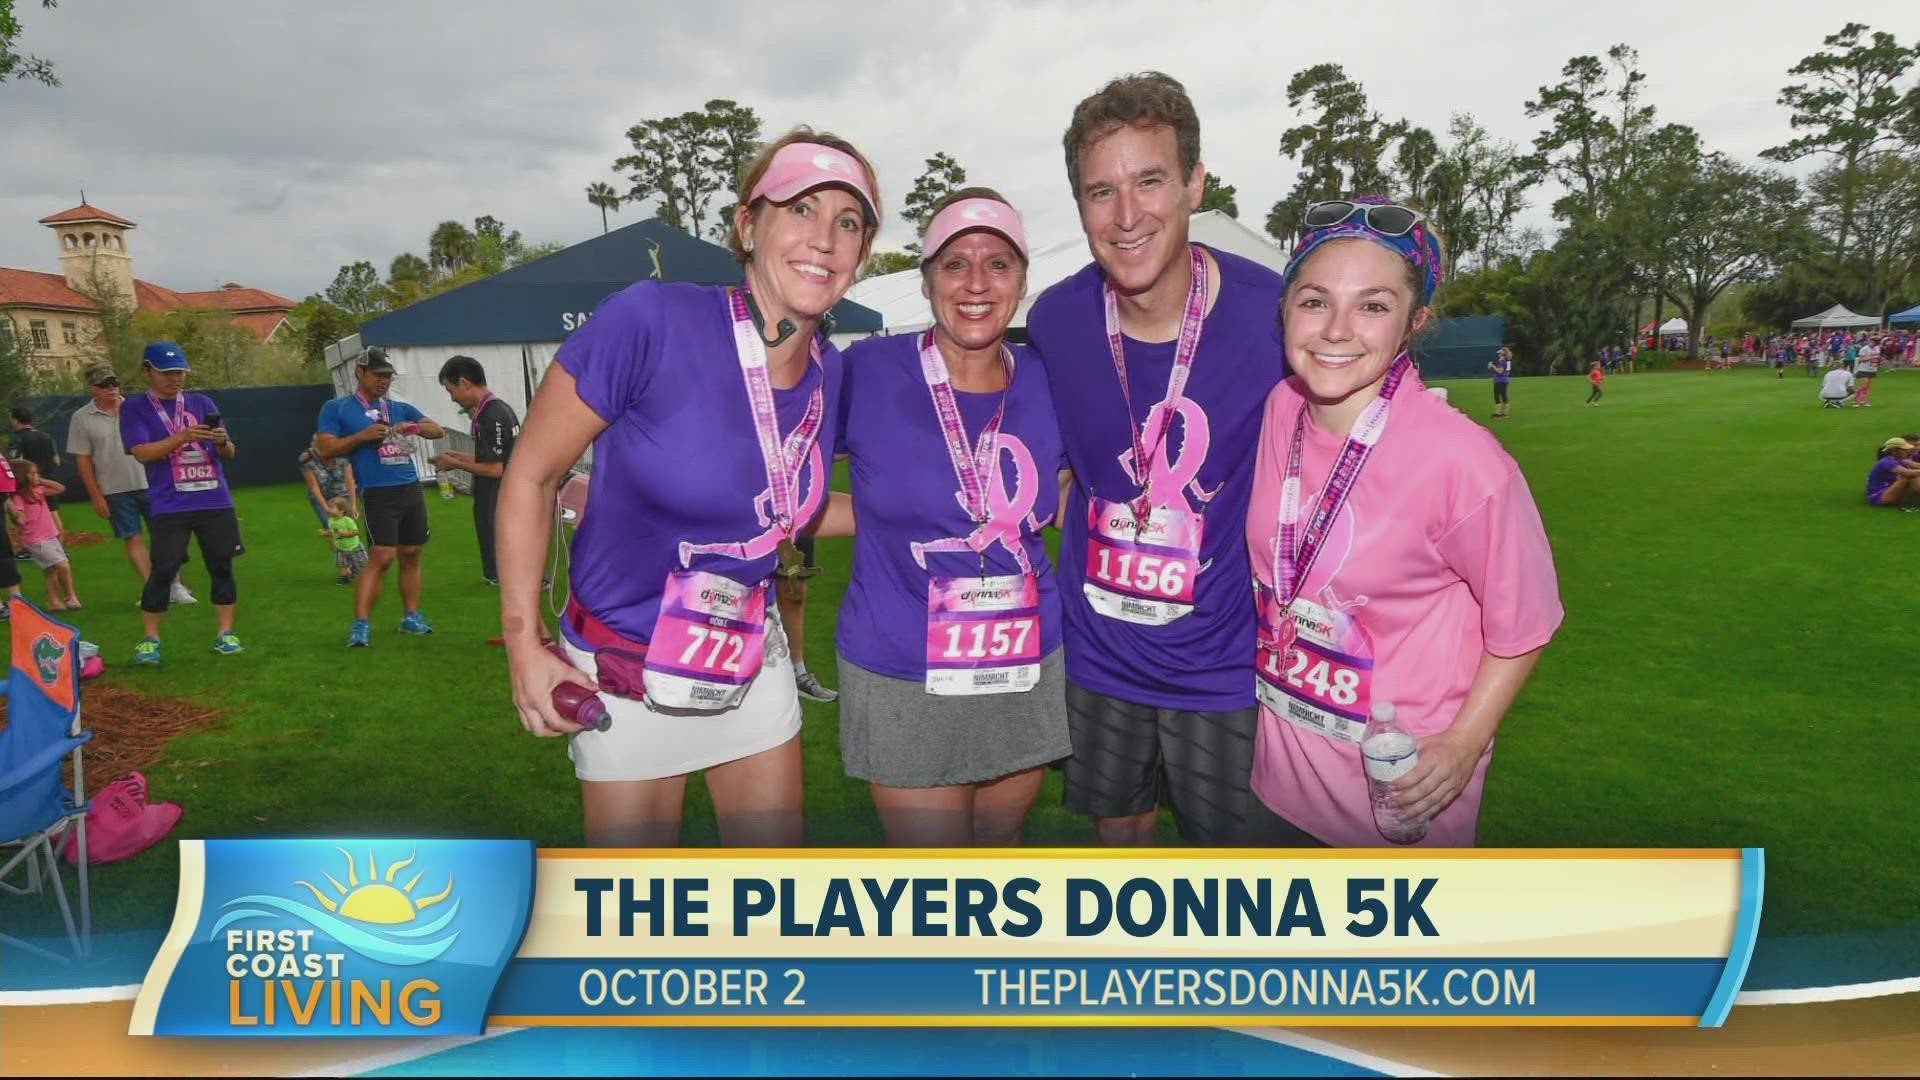 One of the most beautiful 5K races is back at the Stadium Course, celebrating its 15th run to finish breast cancer in partnership with THE PLAYERS Championship.